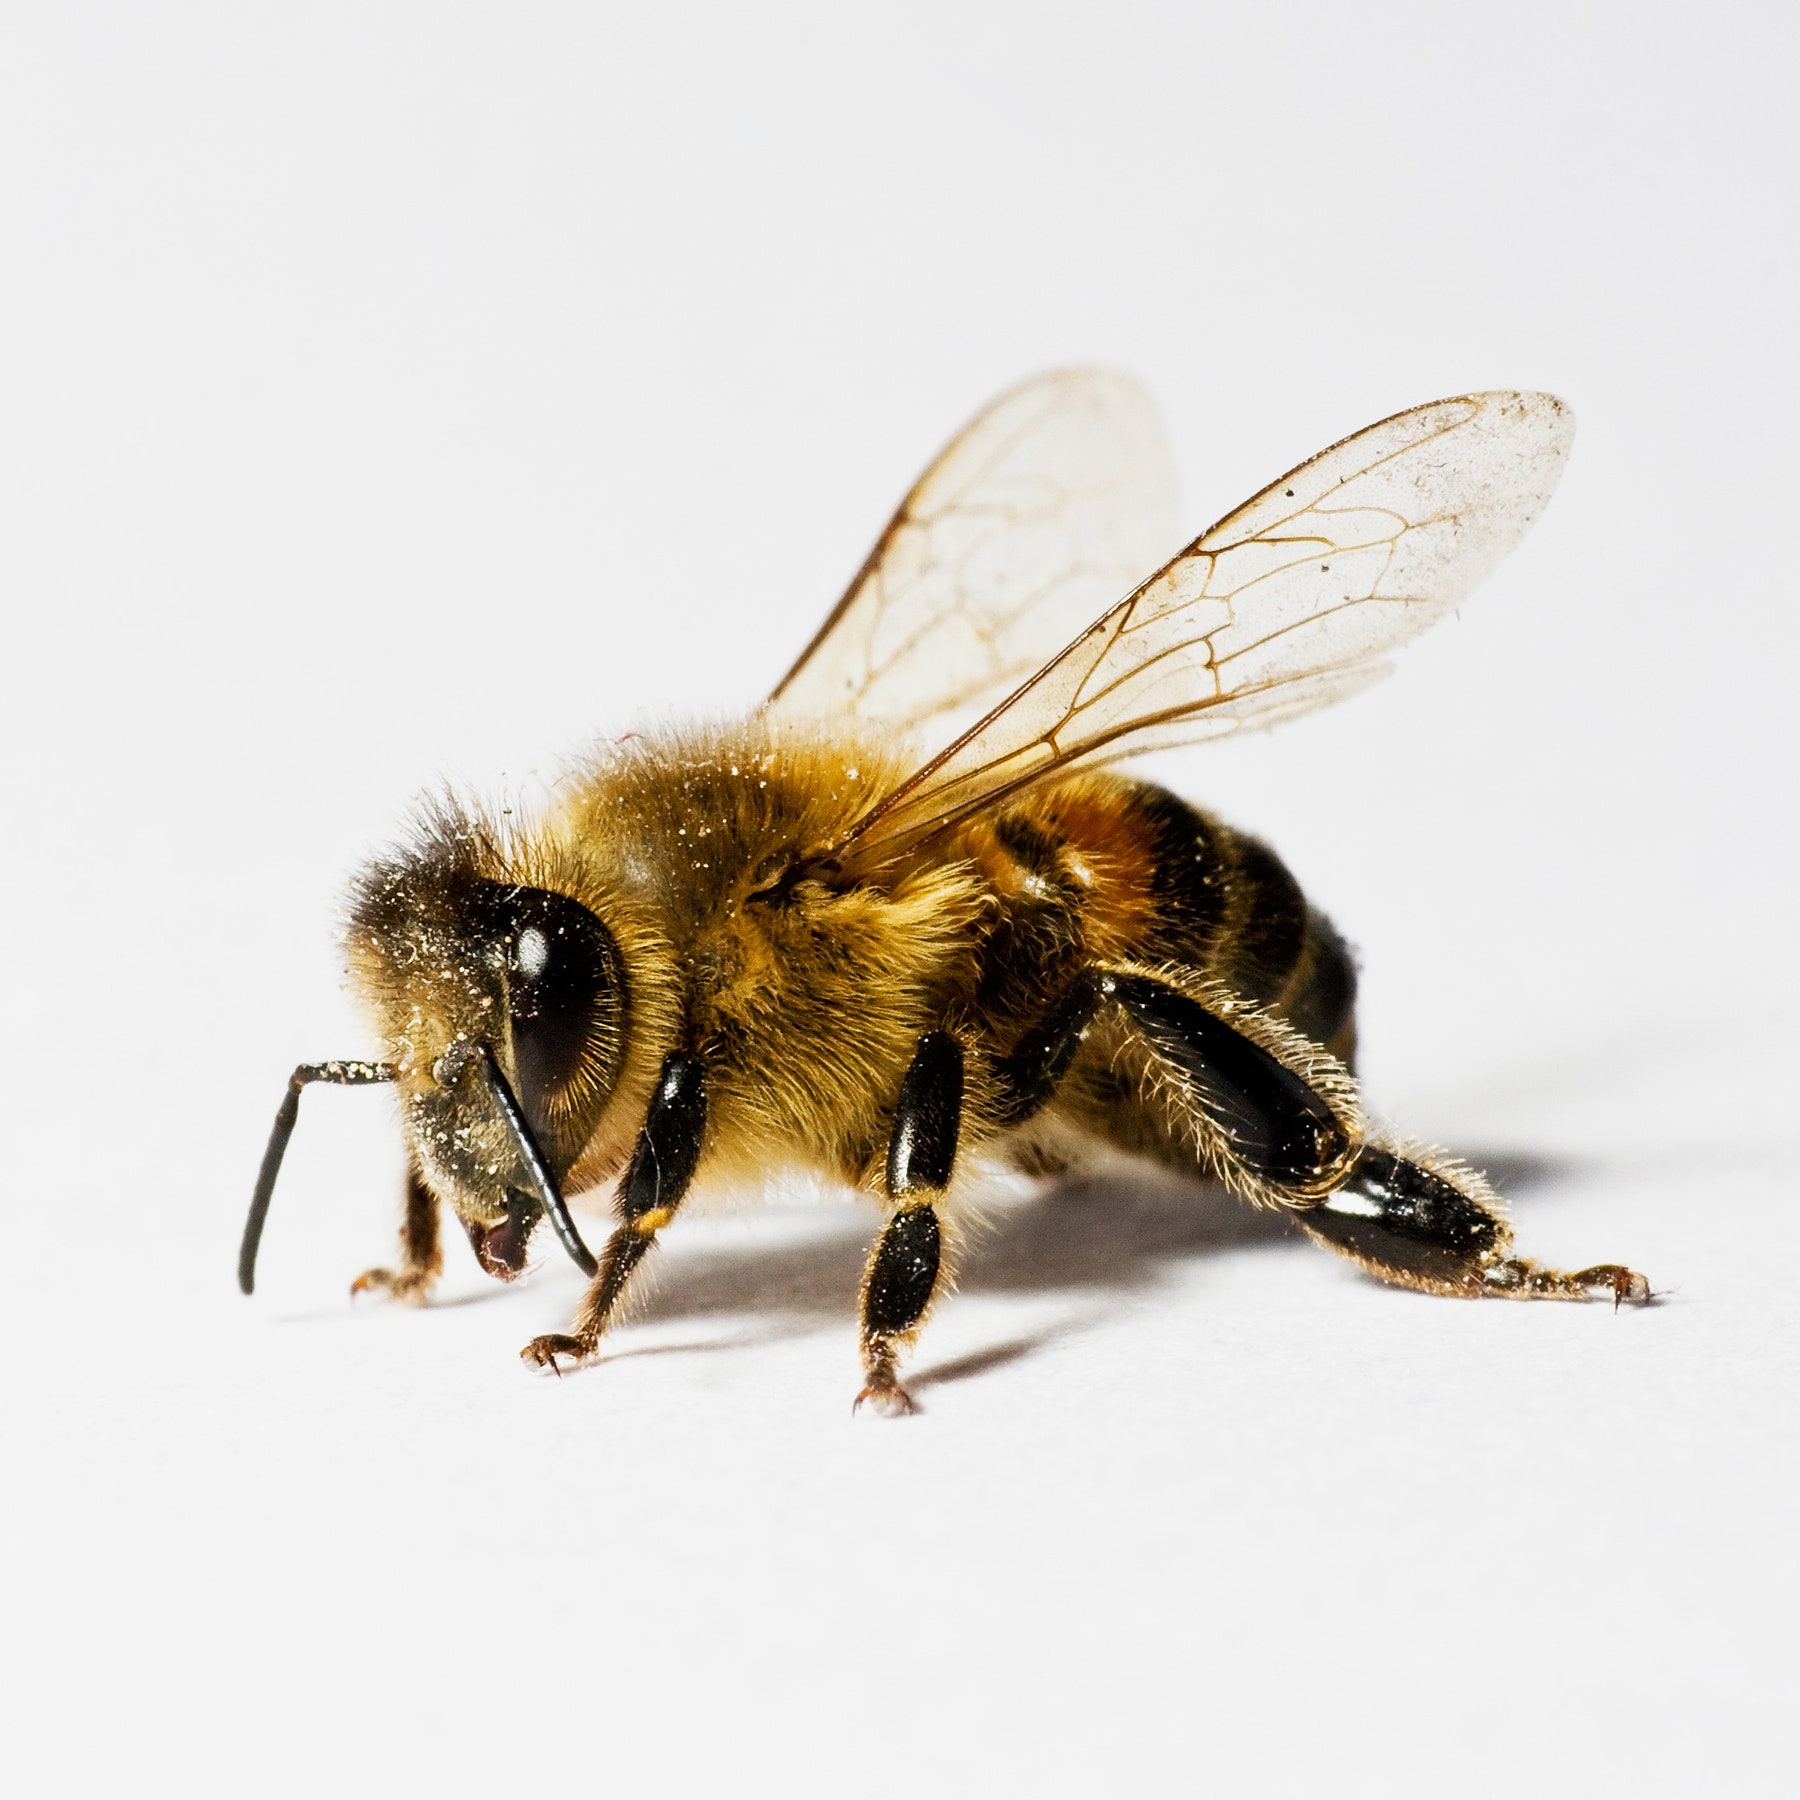 Can Propolis Cure Cancer?